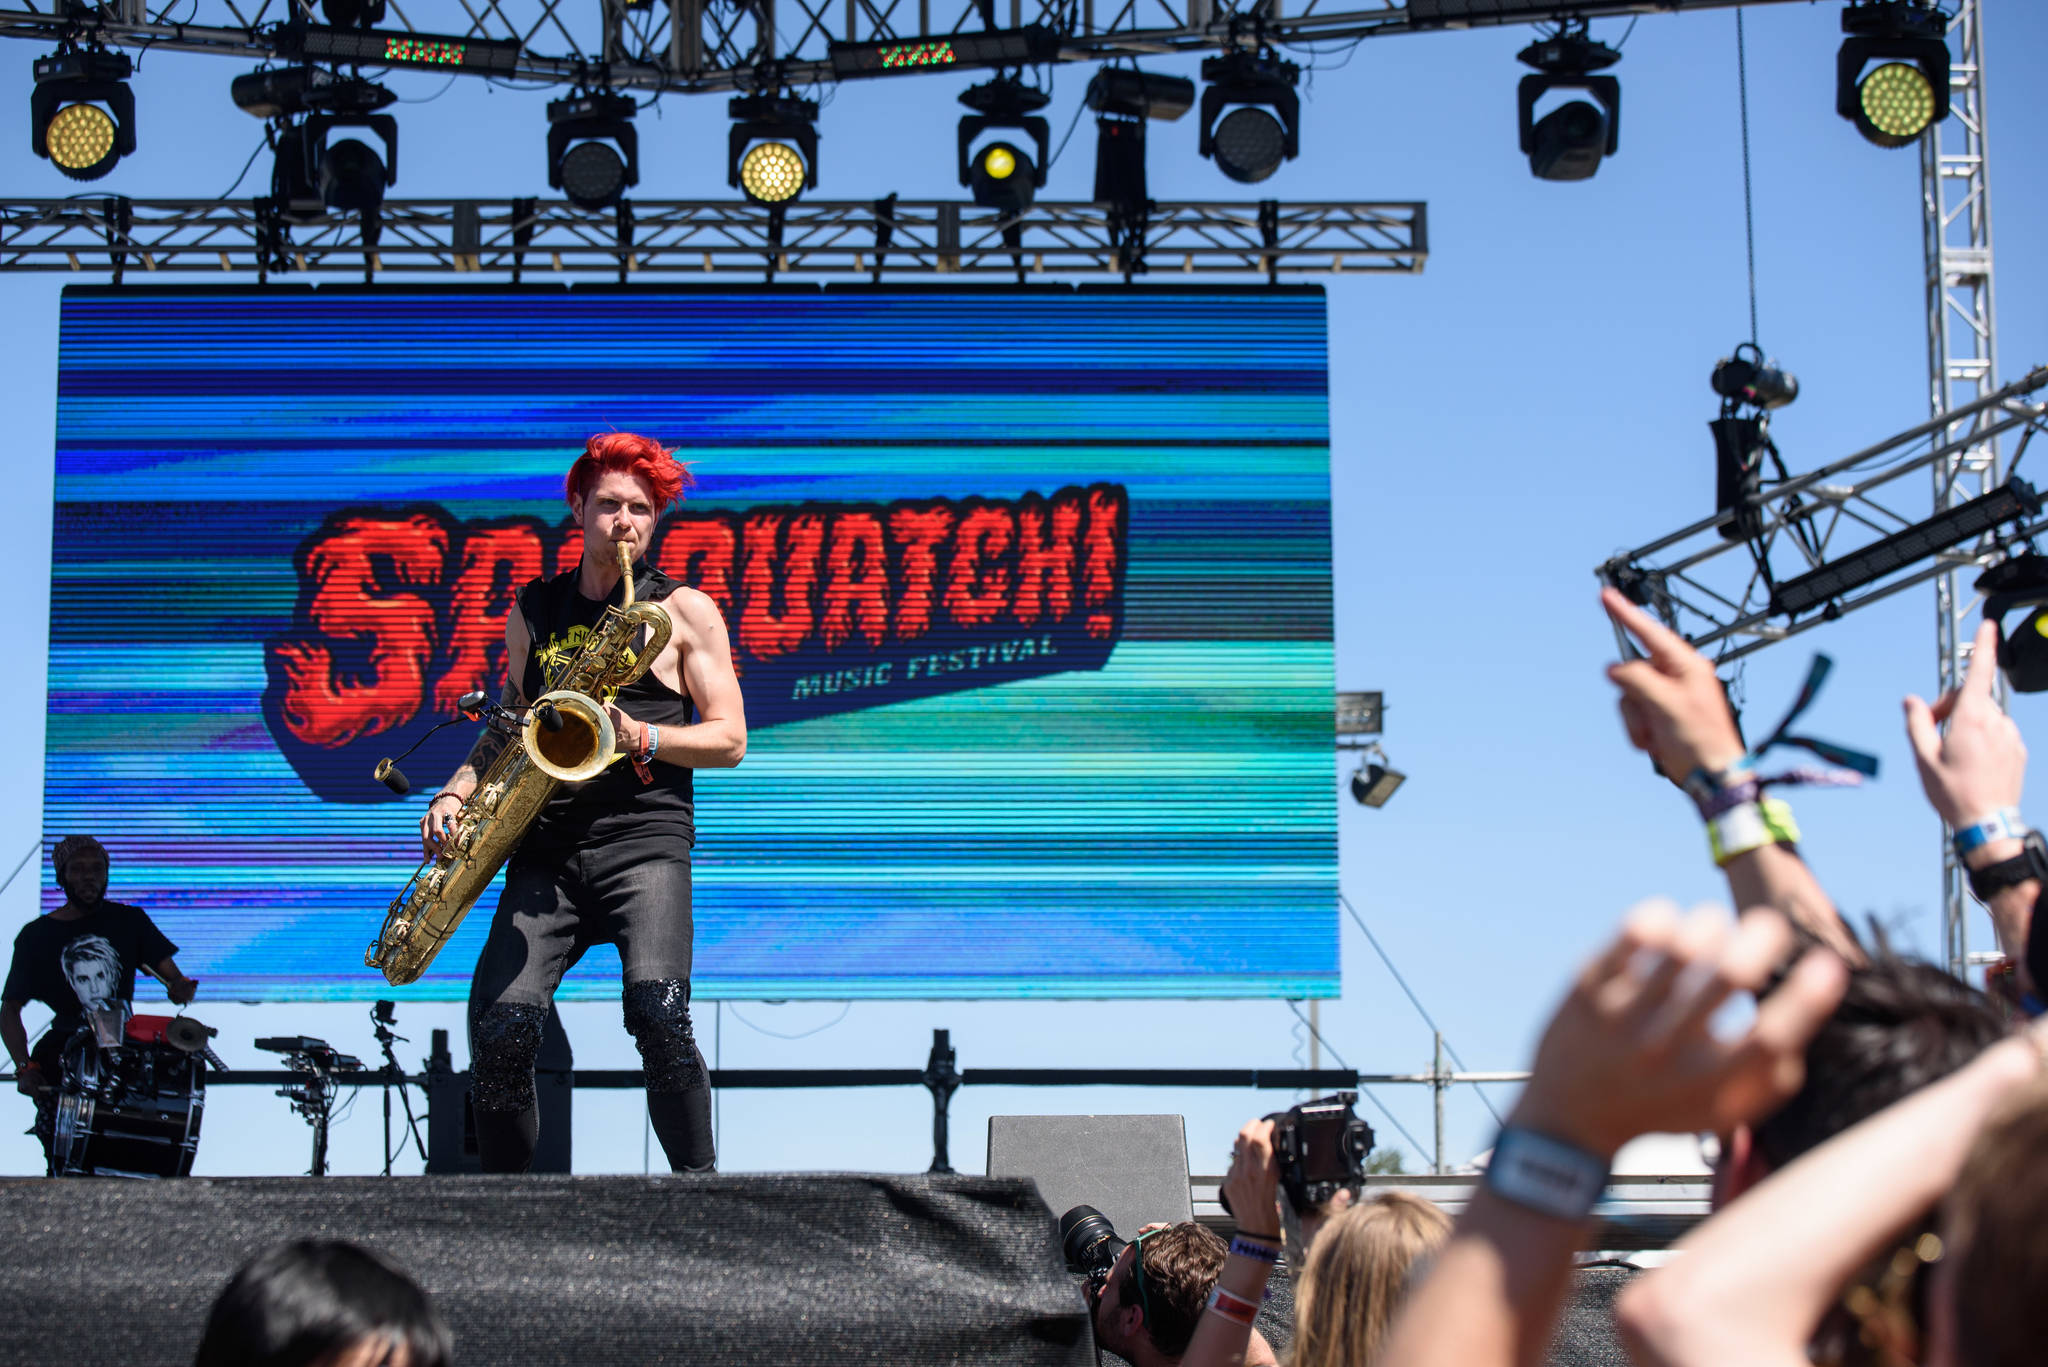 If you like dancing sax players, Too Many Zooz might be for you.